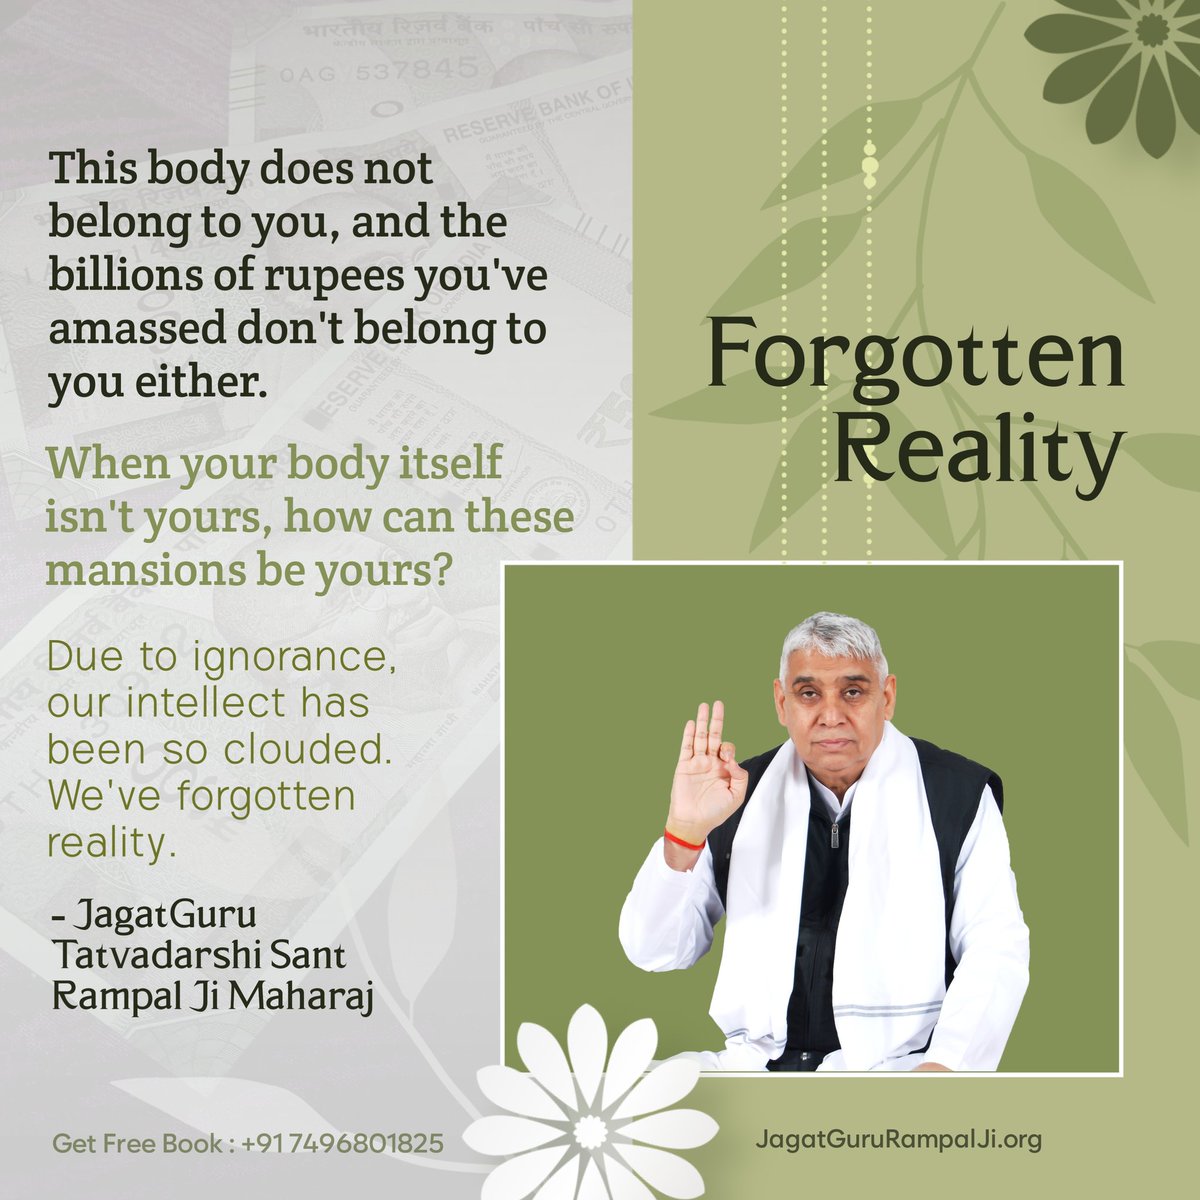 #GodNightMonday Forgotten Reality This body does not belong to you, and the billons of rupees you've amassed don't belong to you either. When your body itself isn't yours, how can these mansions be yours? Visit Saint Rampal Ji Maharaj YouTube Channel #MondayMotivation